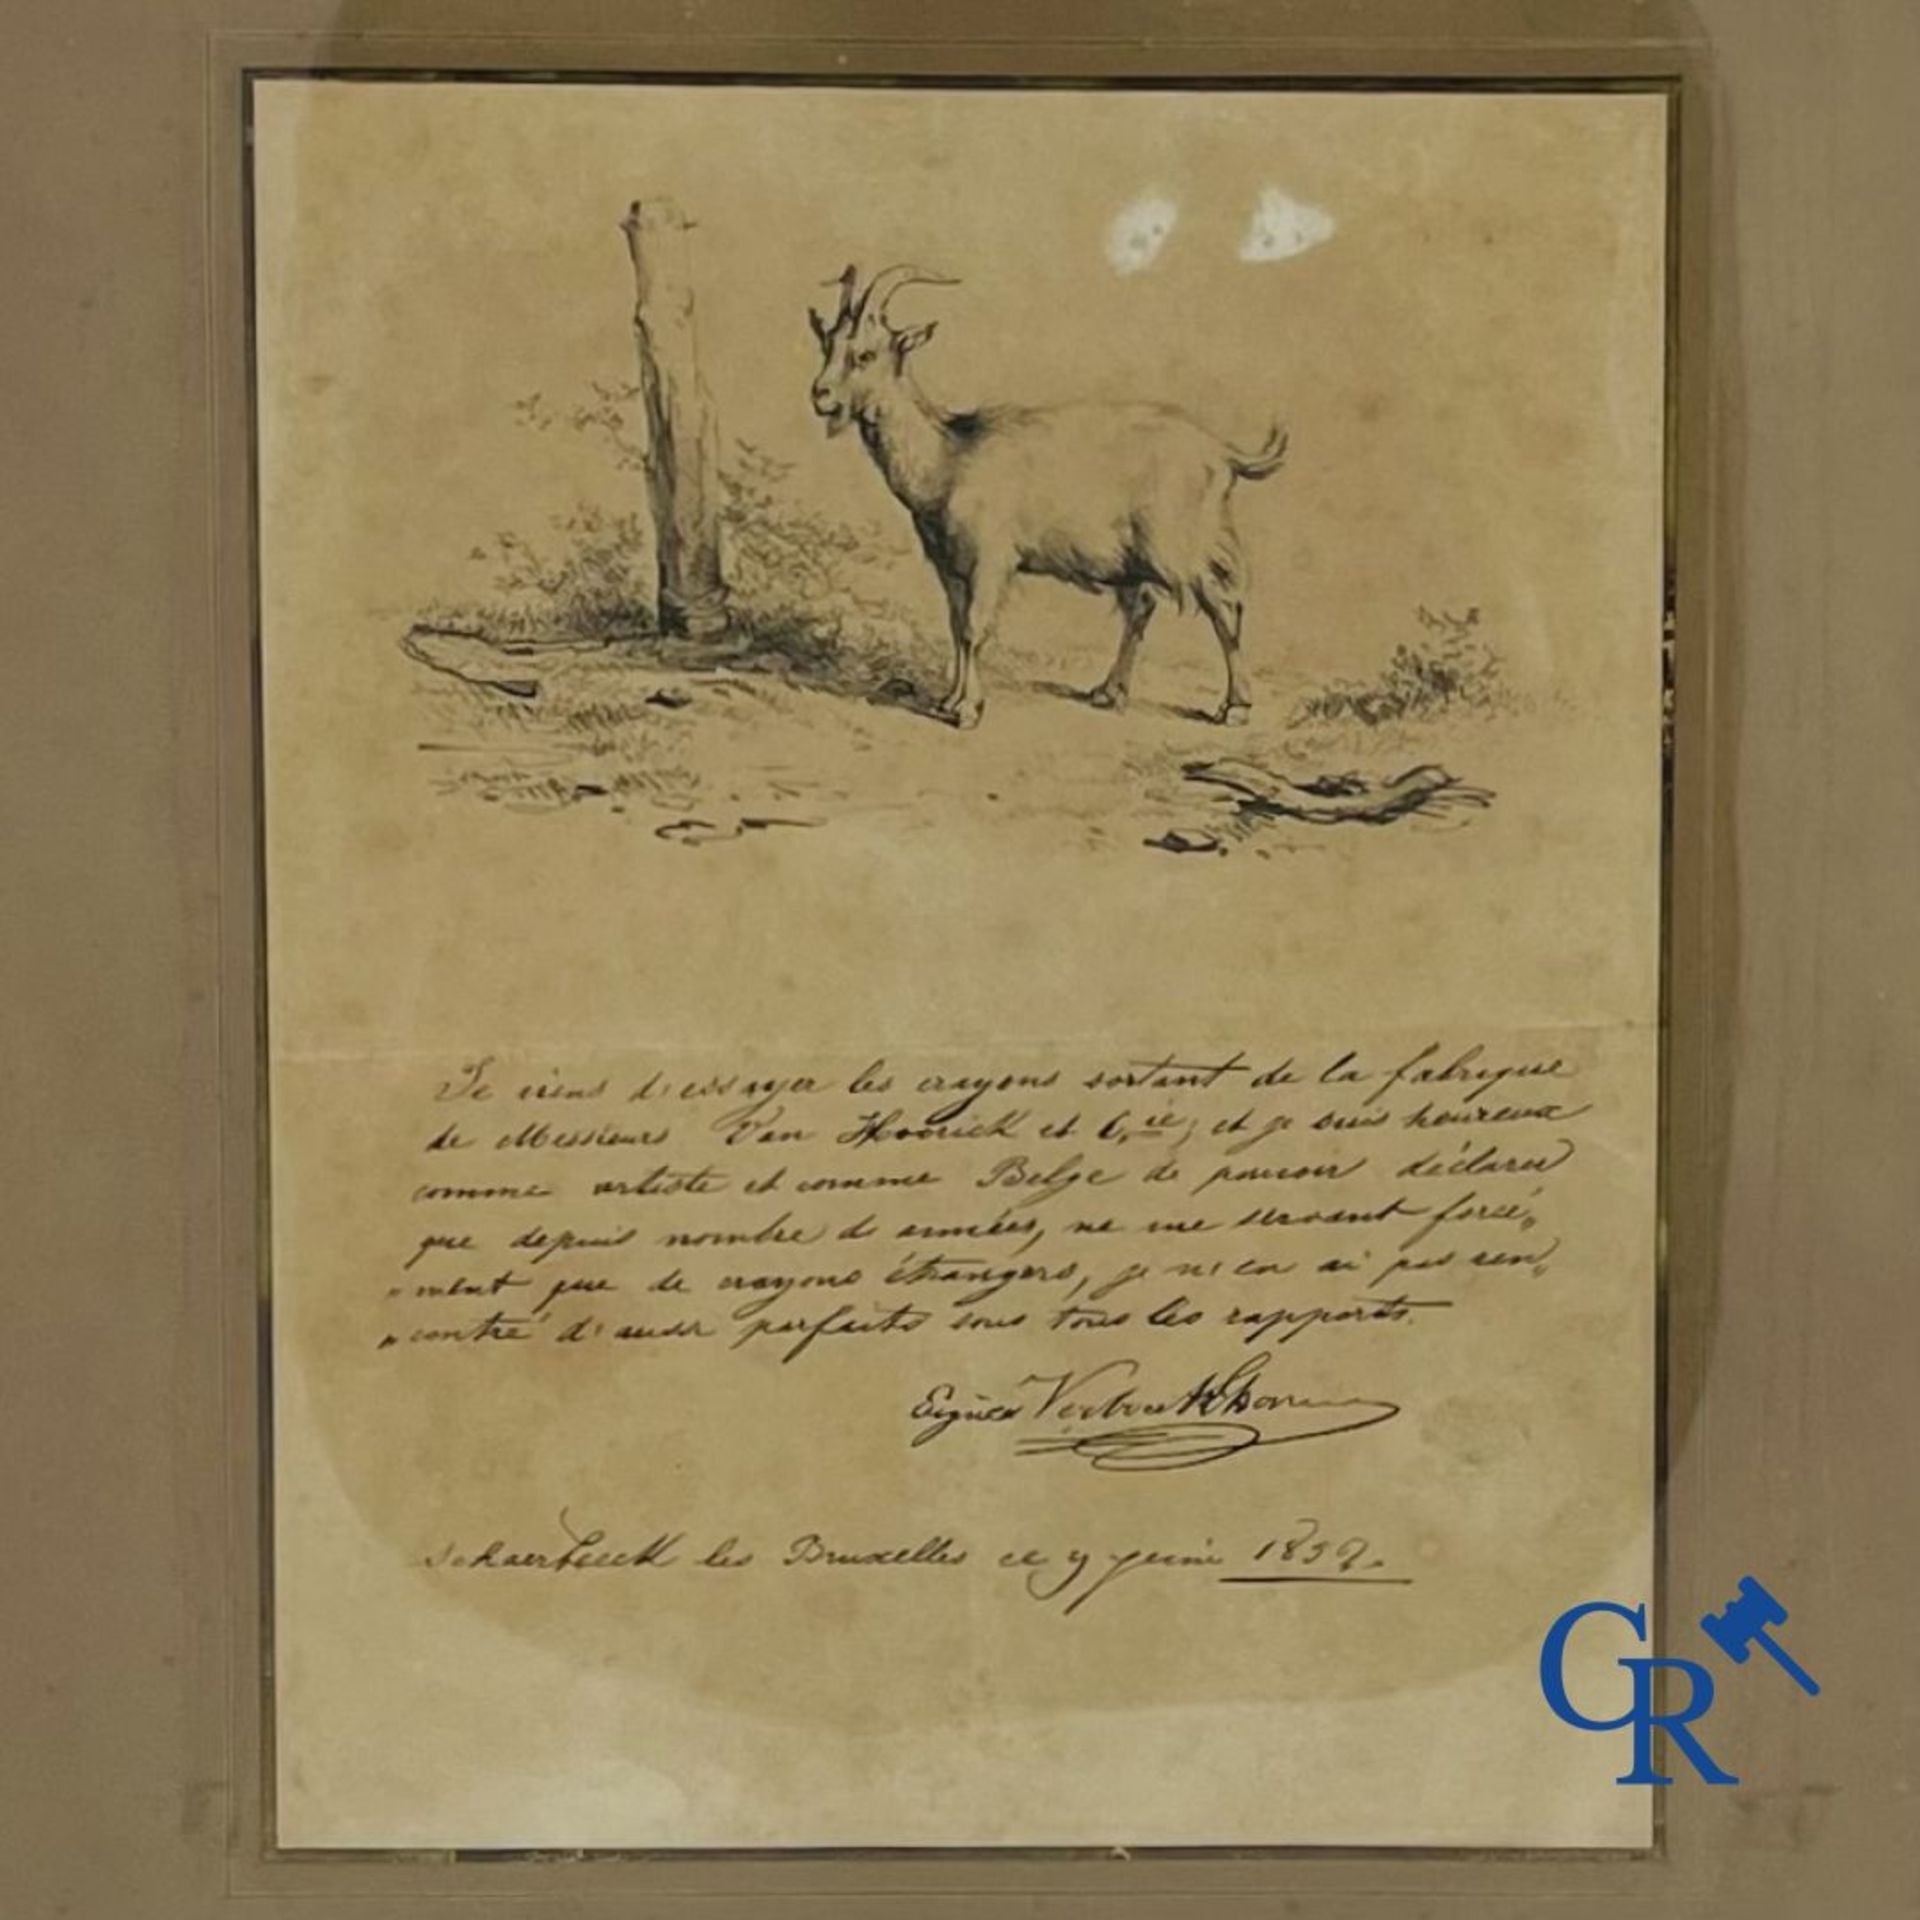 Eugène Verboeckhoven: Pencil and ink on paper. Signed and dated 1852.